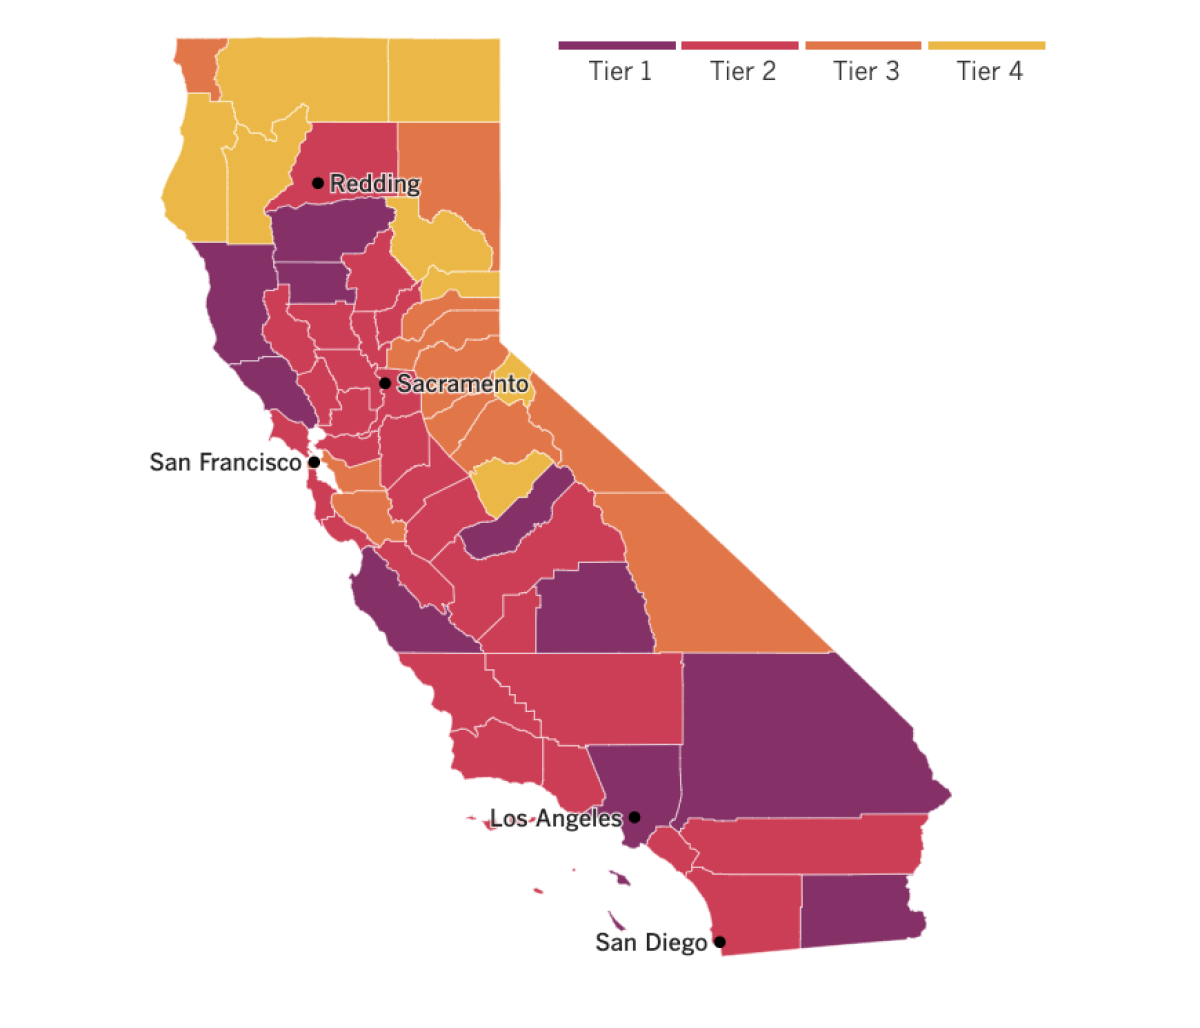 A map of California showing the tiers to which counties have been assigned based on local level of coronavirus risk.